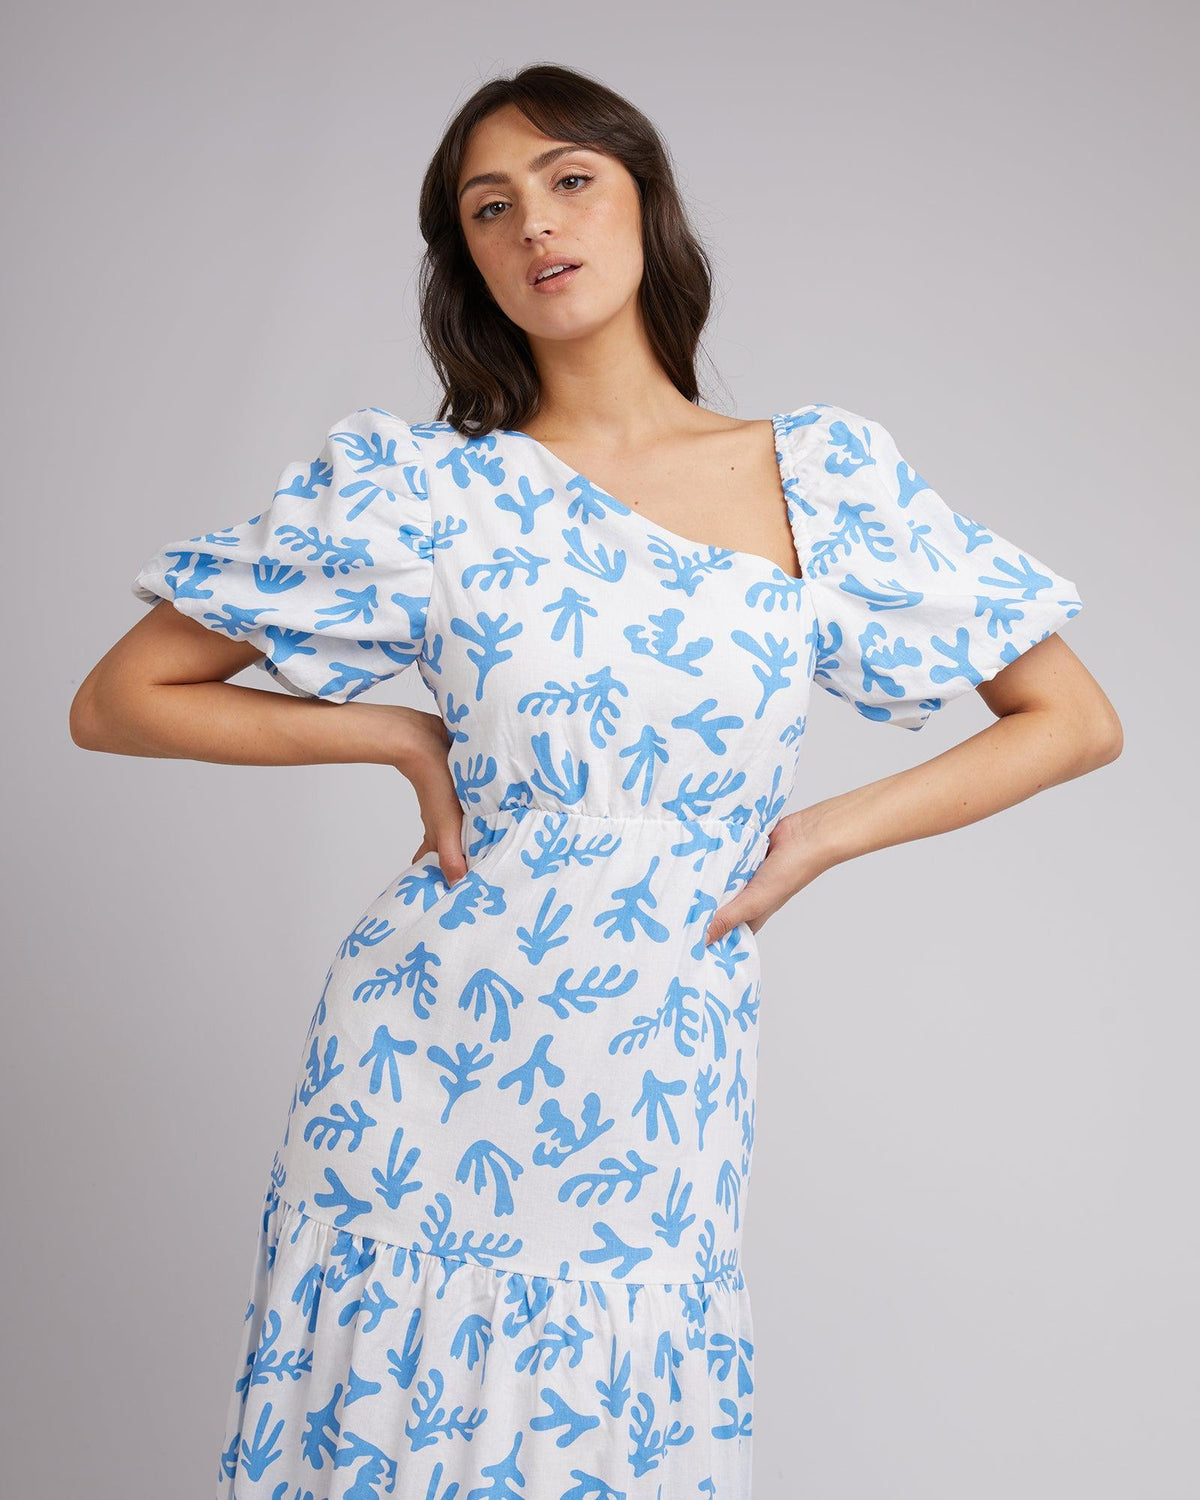 All About Eve-Zimi Print Maxi Dress-Edge Clothing